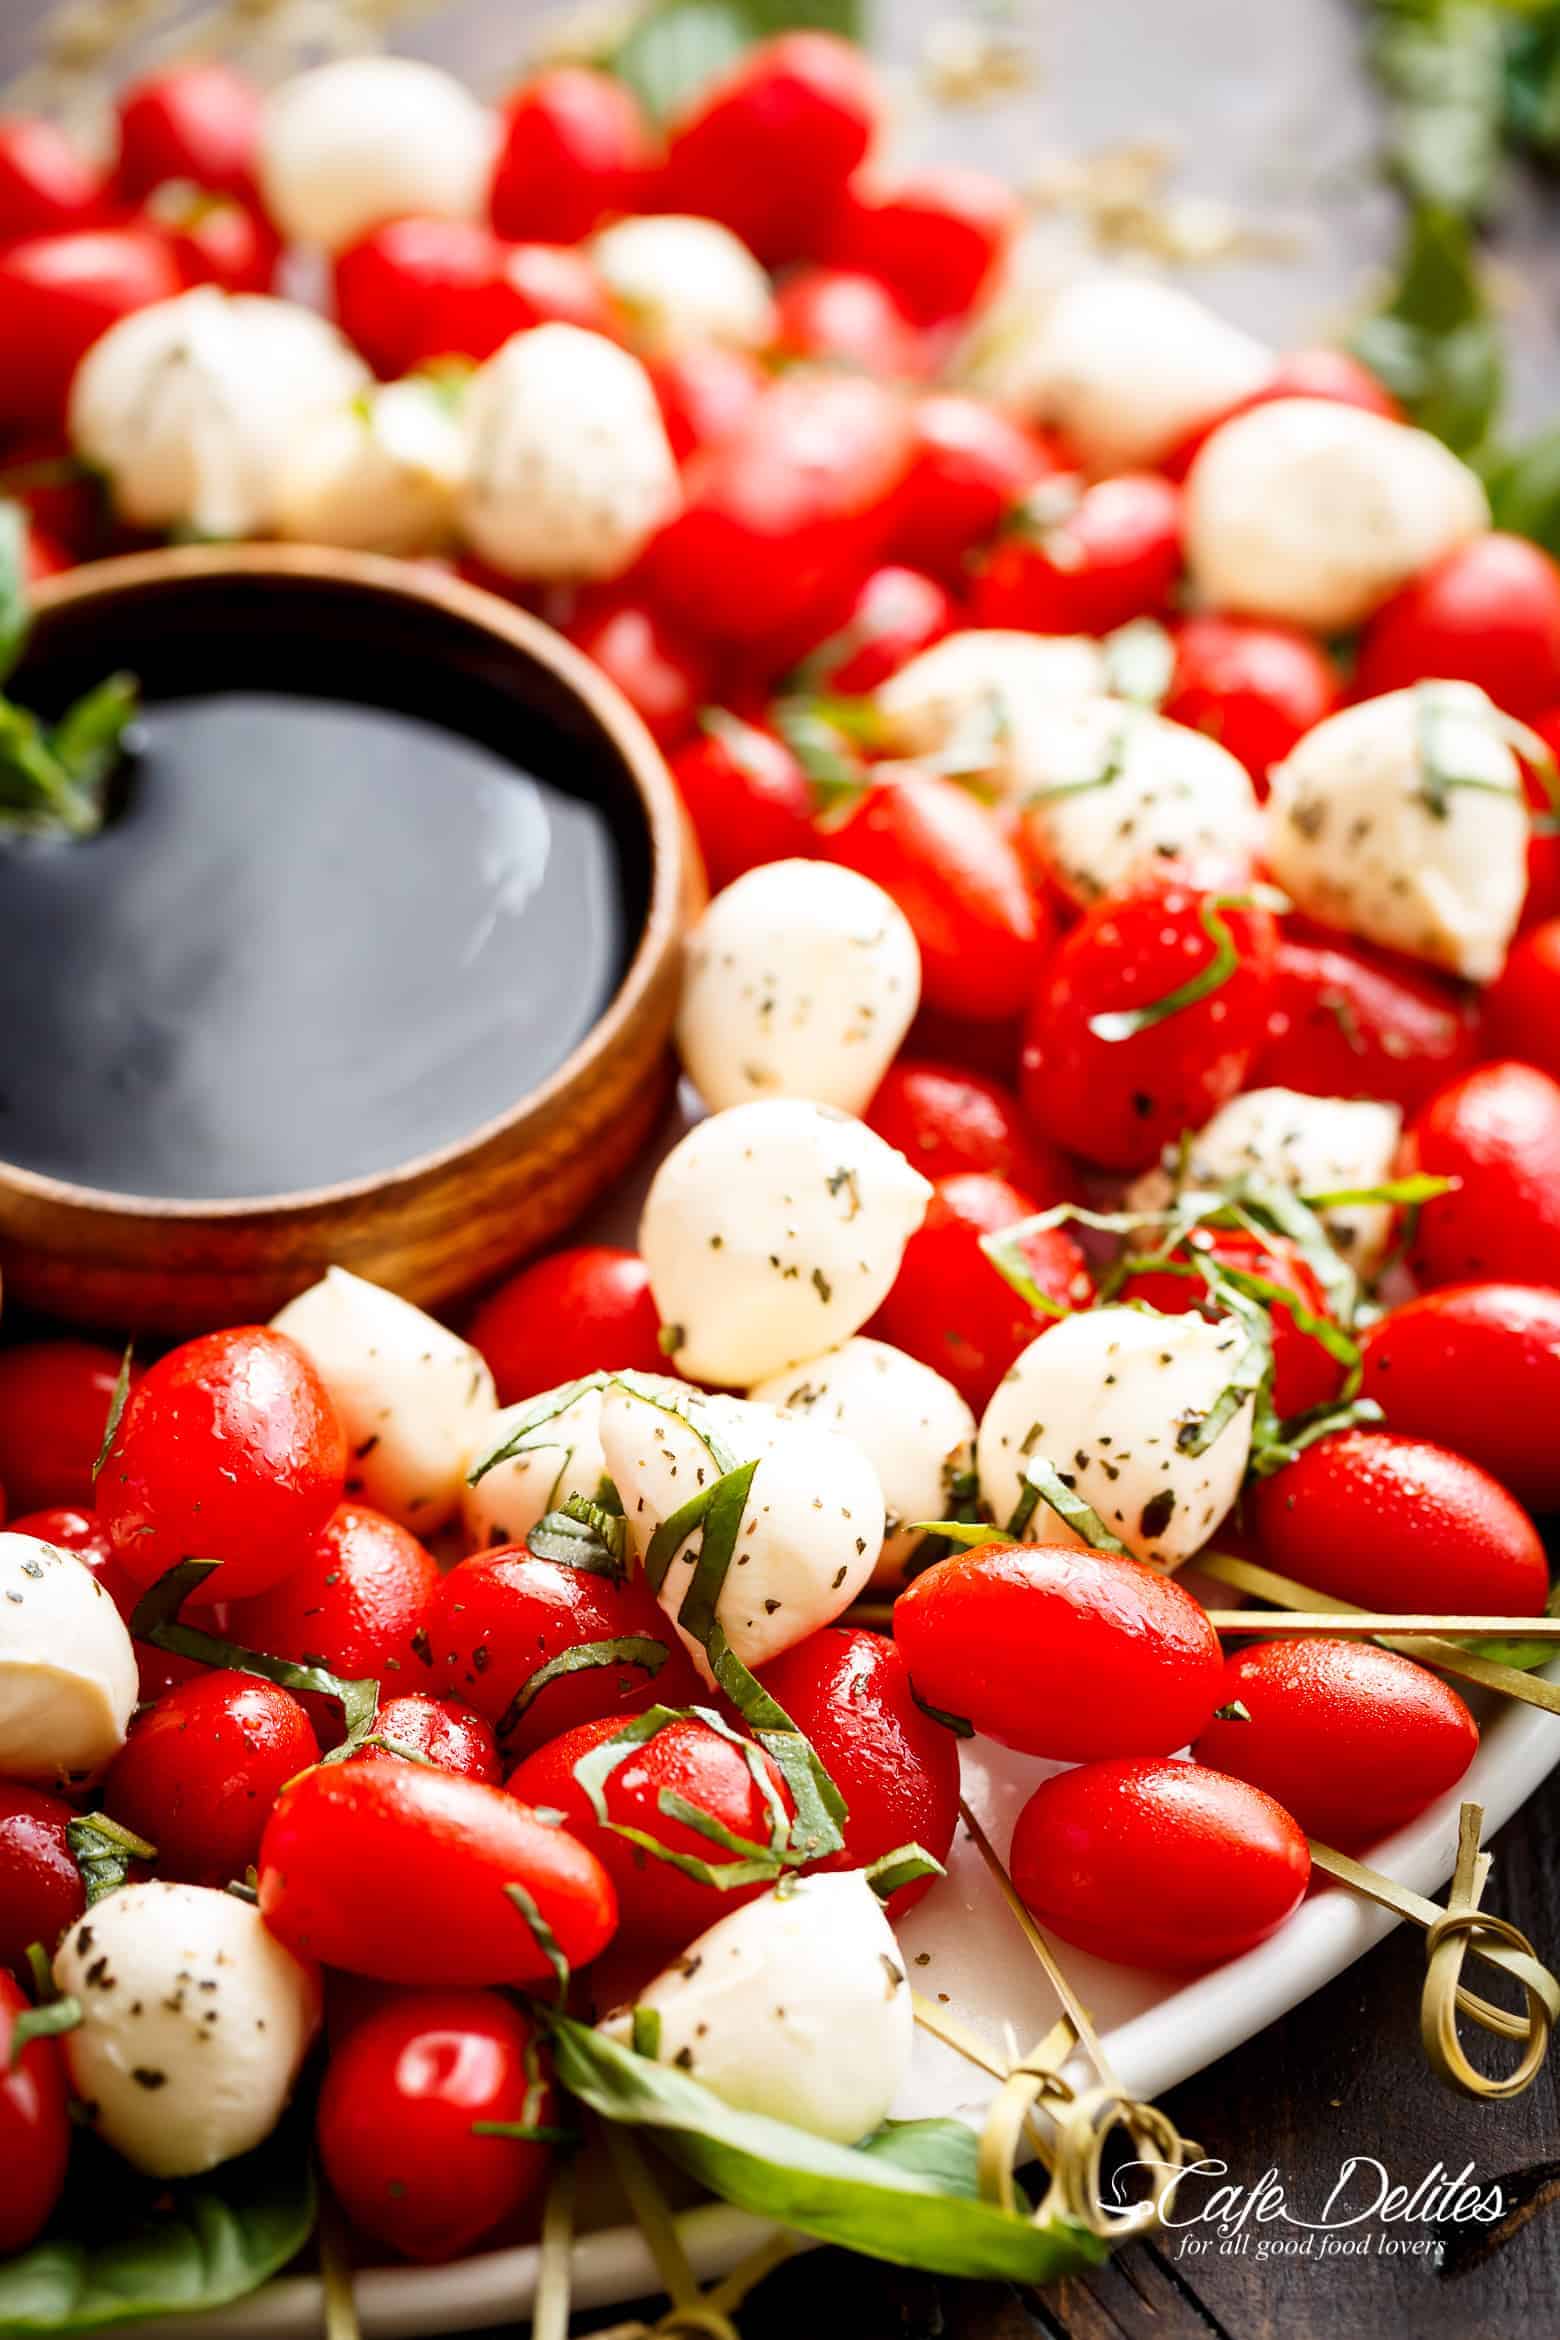 Caprese Salad Christmas Wreath is a festive and healthy appetiser for your Christmas table! | https://cafedelites.com